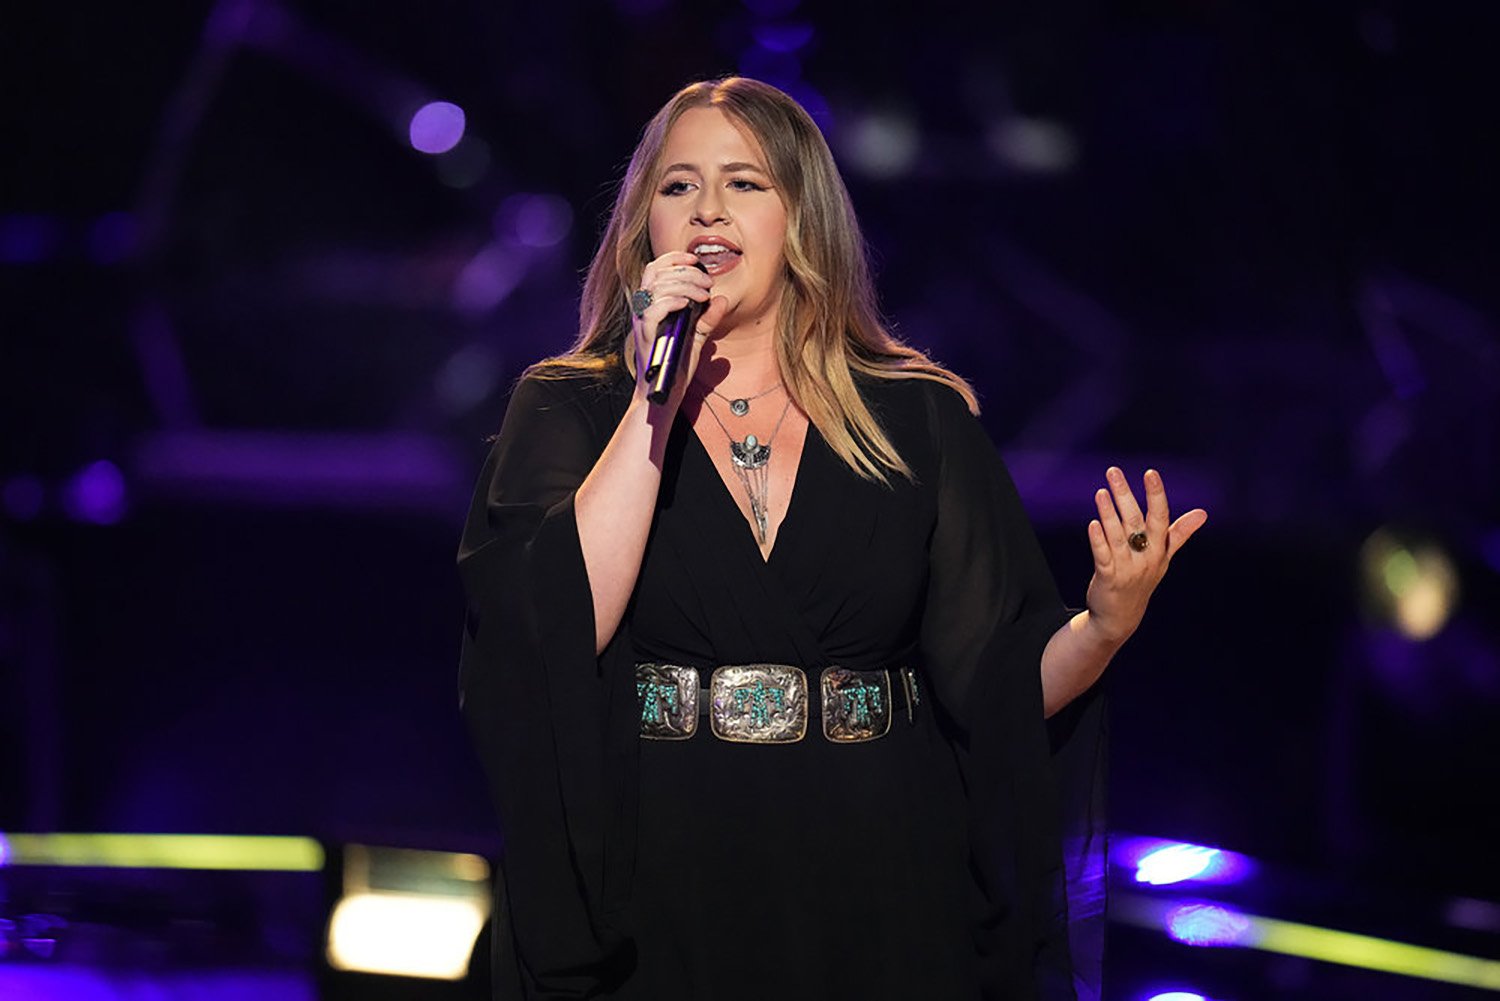 Kayla Von Der Heide performs on The Voice Knockout Rounds ahead of the live shows, which are not on tonight, Nov. 8